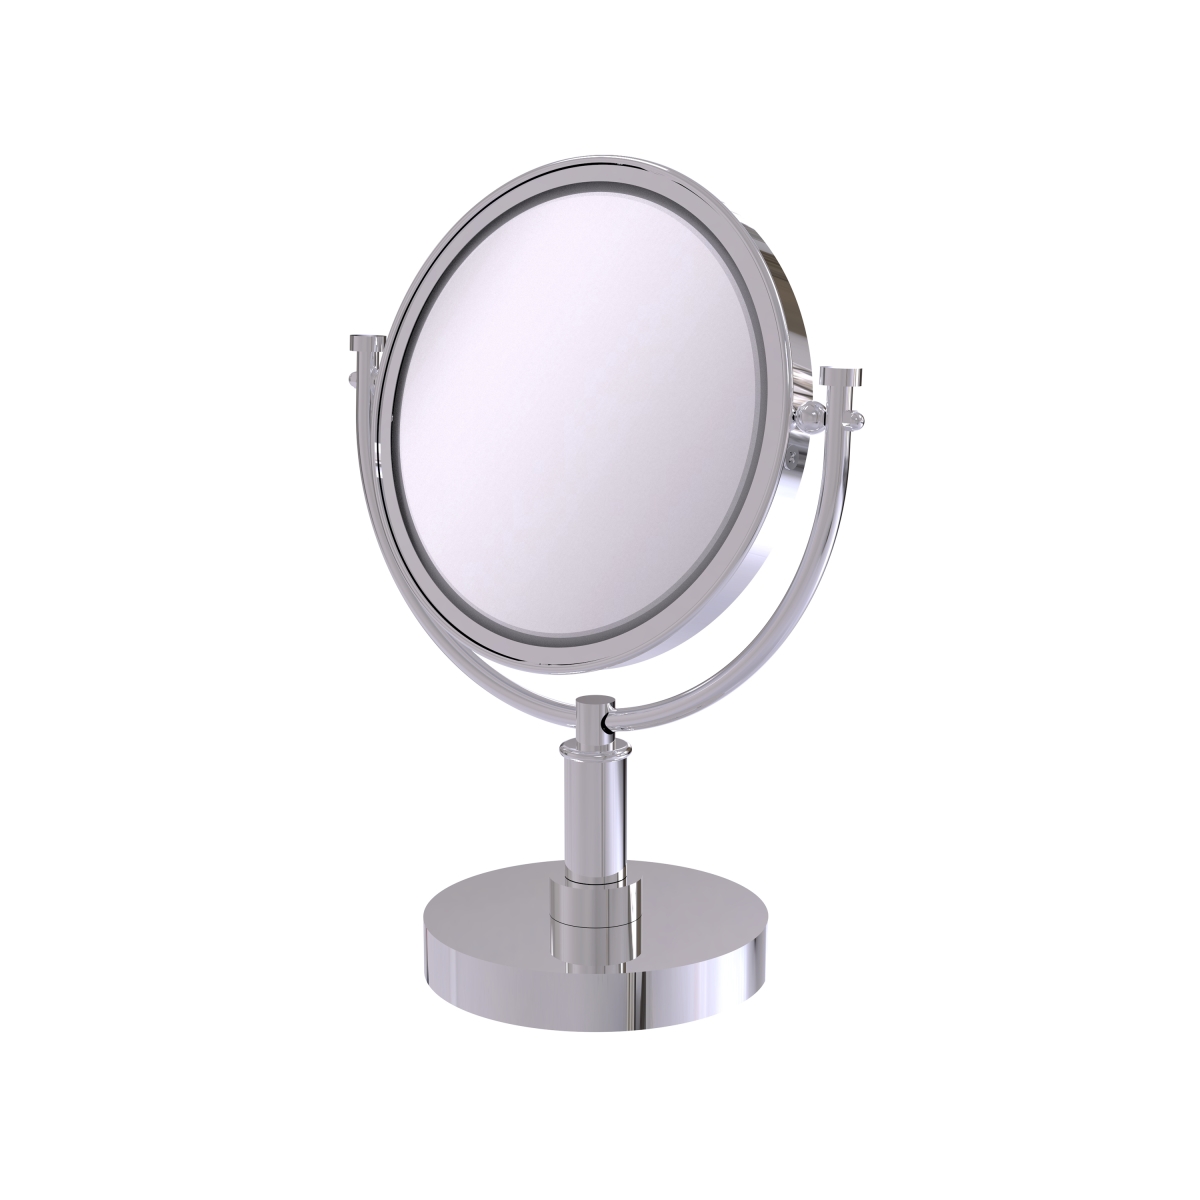 Picture of Allied Brass DM-4-5X-PC 8 in. Vanity Top Make-Up Mirror 5X Magnification, Polished Chrome - 15 x 8 x 8 in.